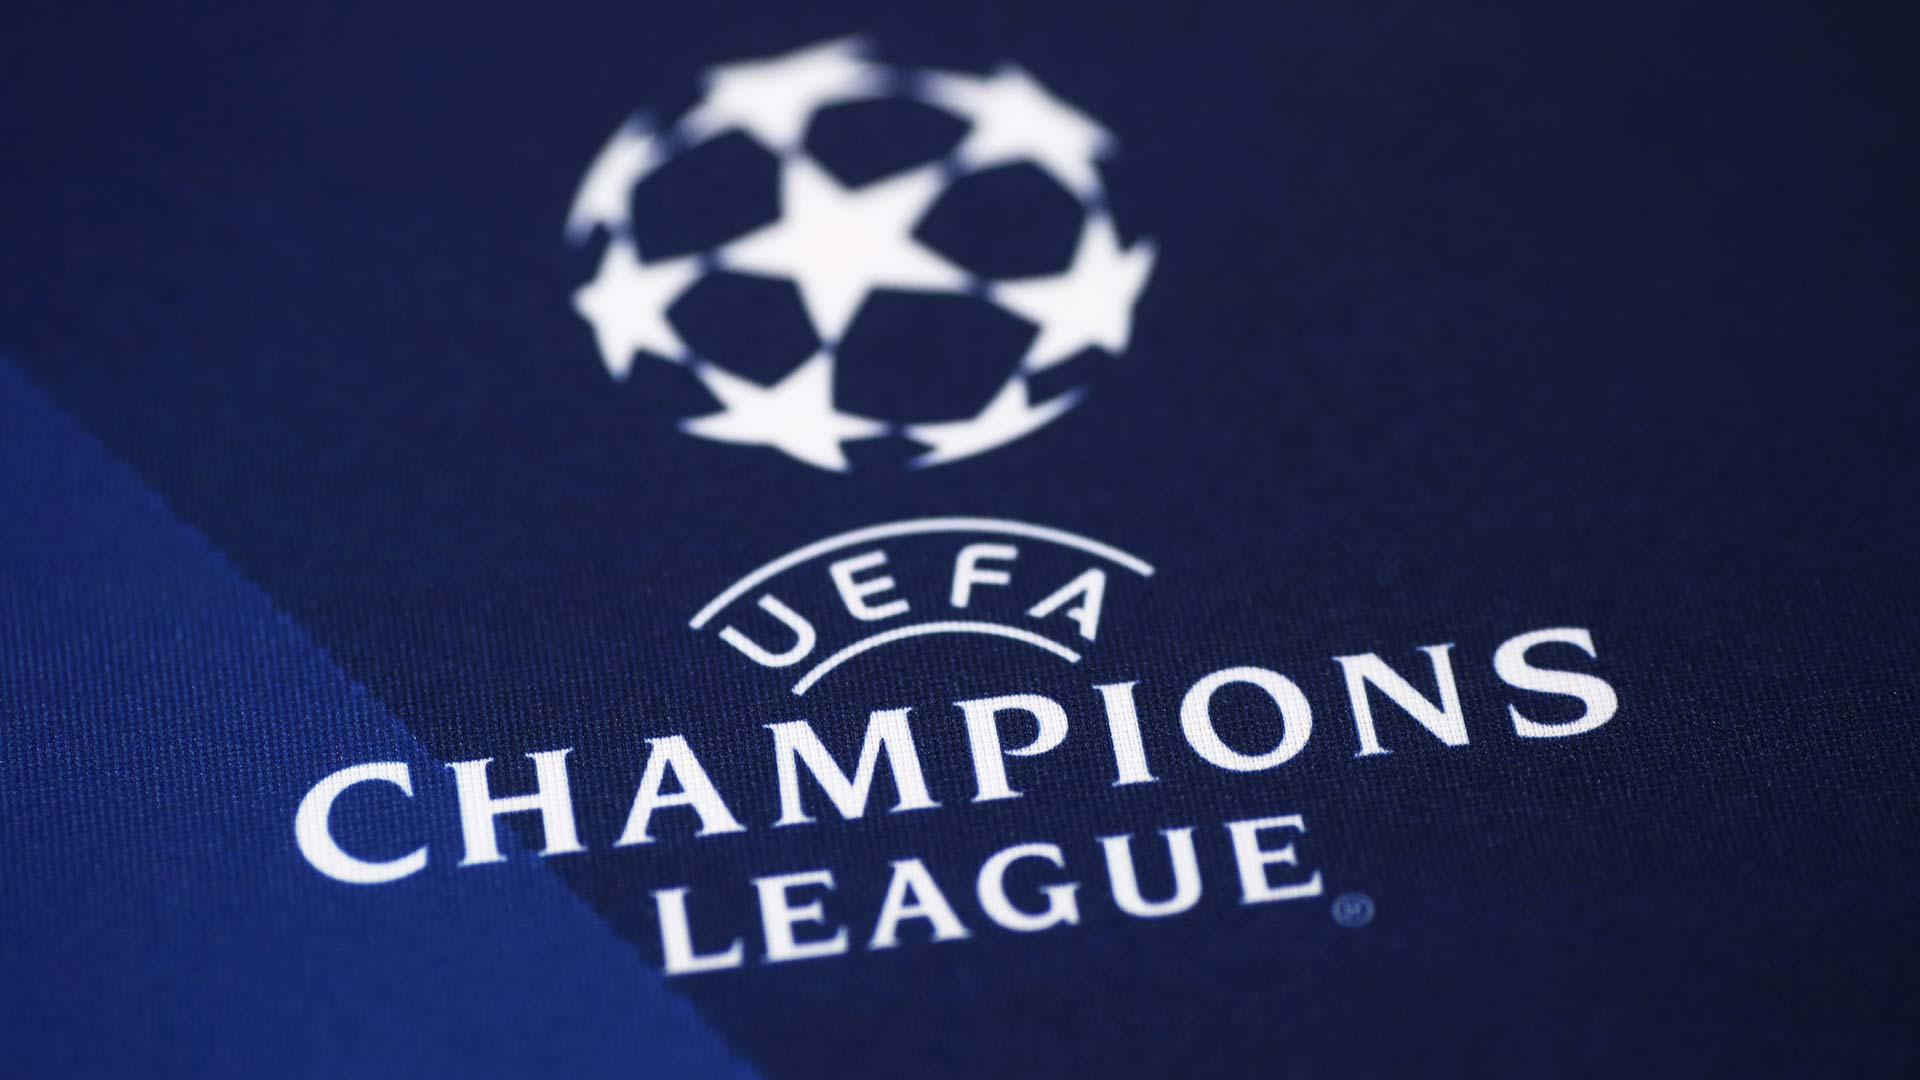 How to watch Champions League 21/22 — live stream the final for free